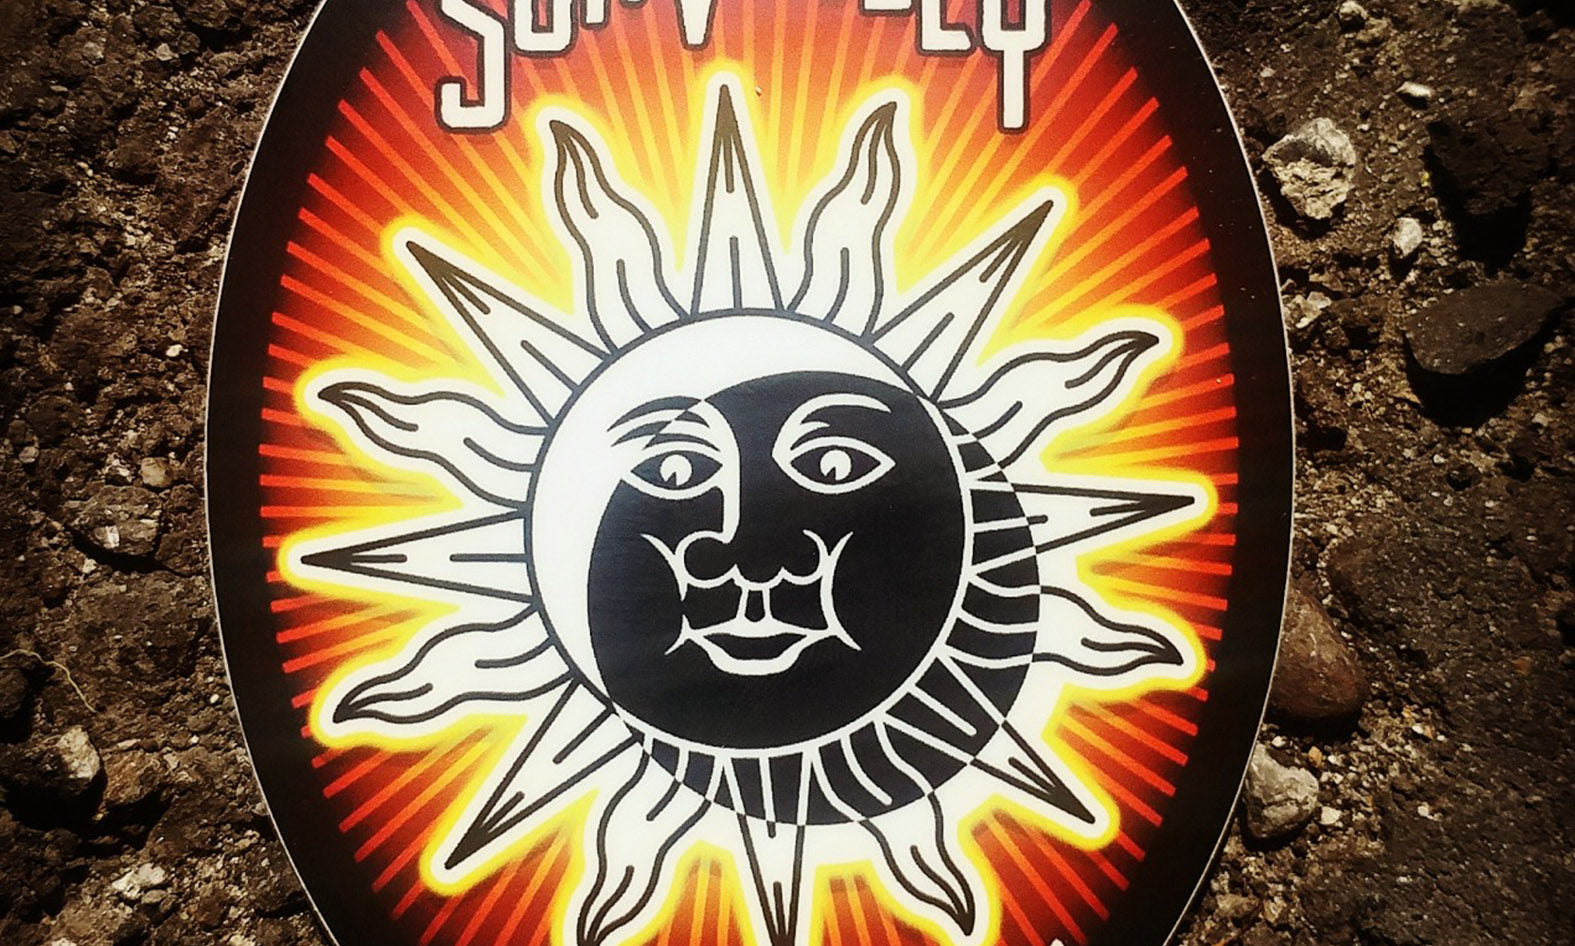 Sun Valley Brewery "Solar Eclipse" Tap Handle Label